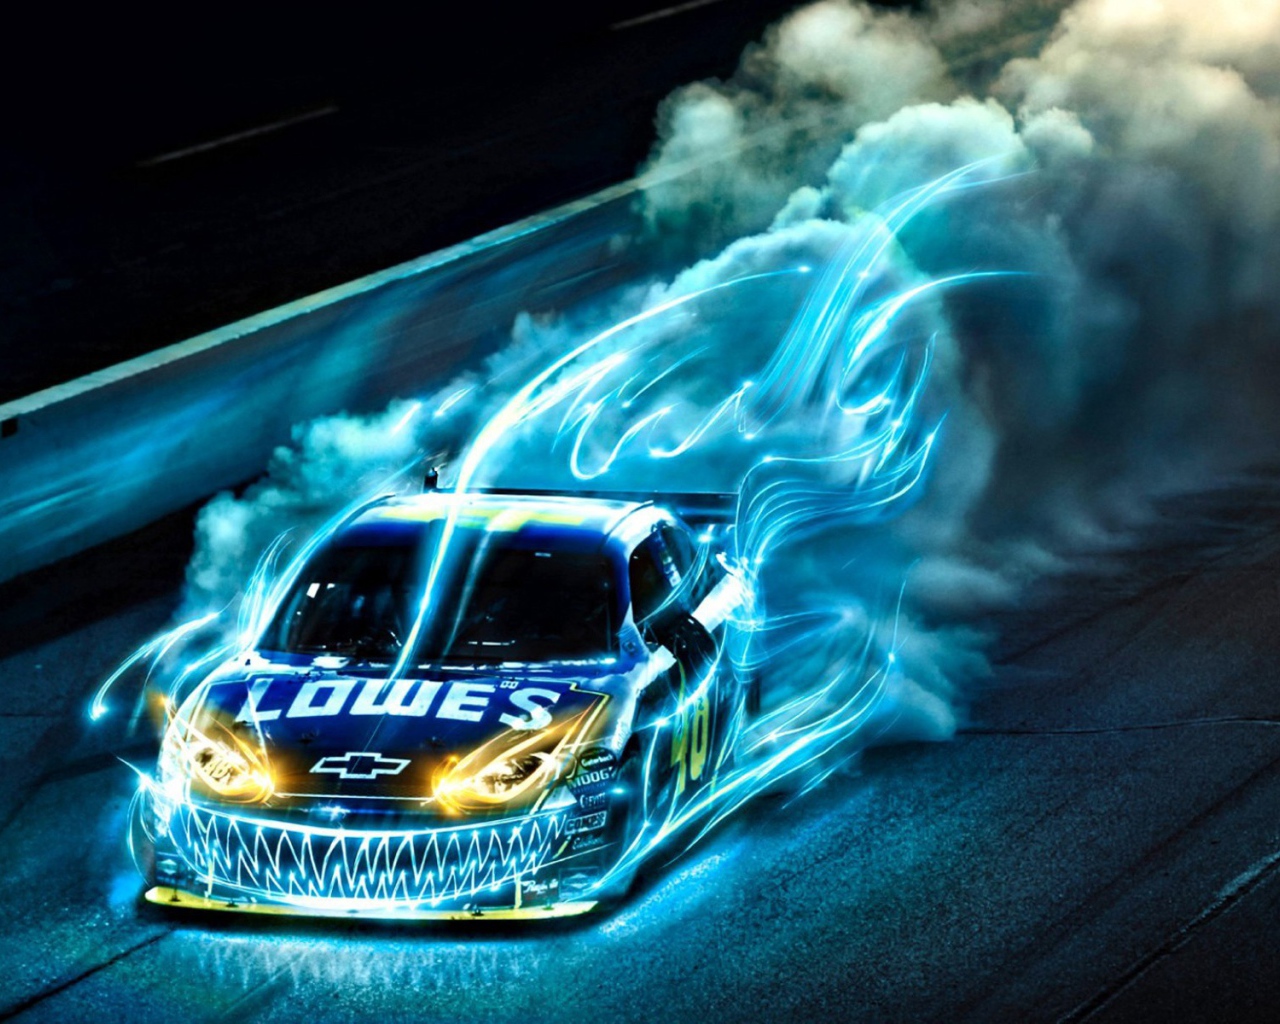 Chevrolet racing in the blue flame